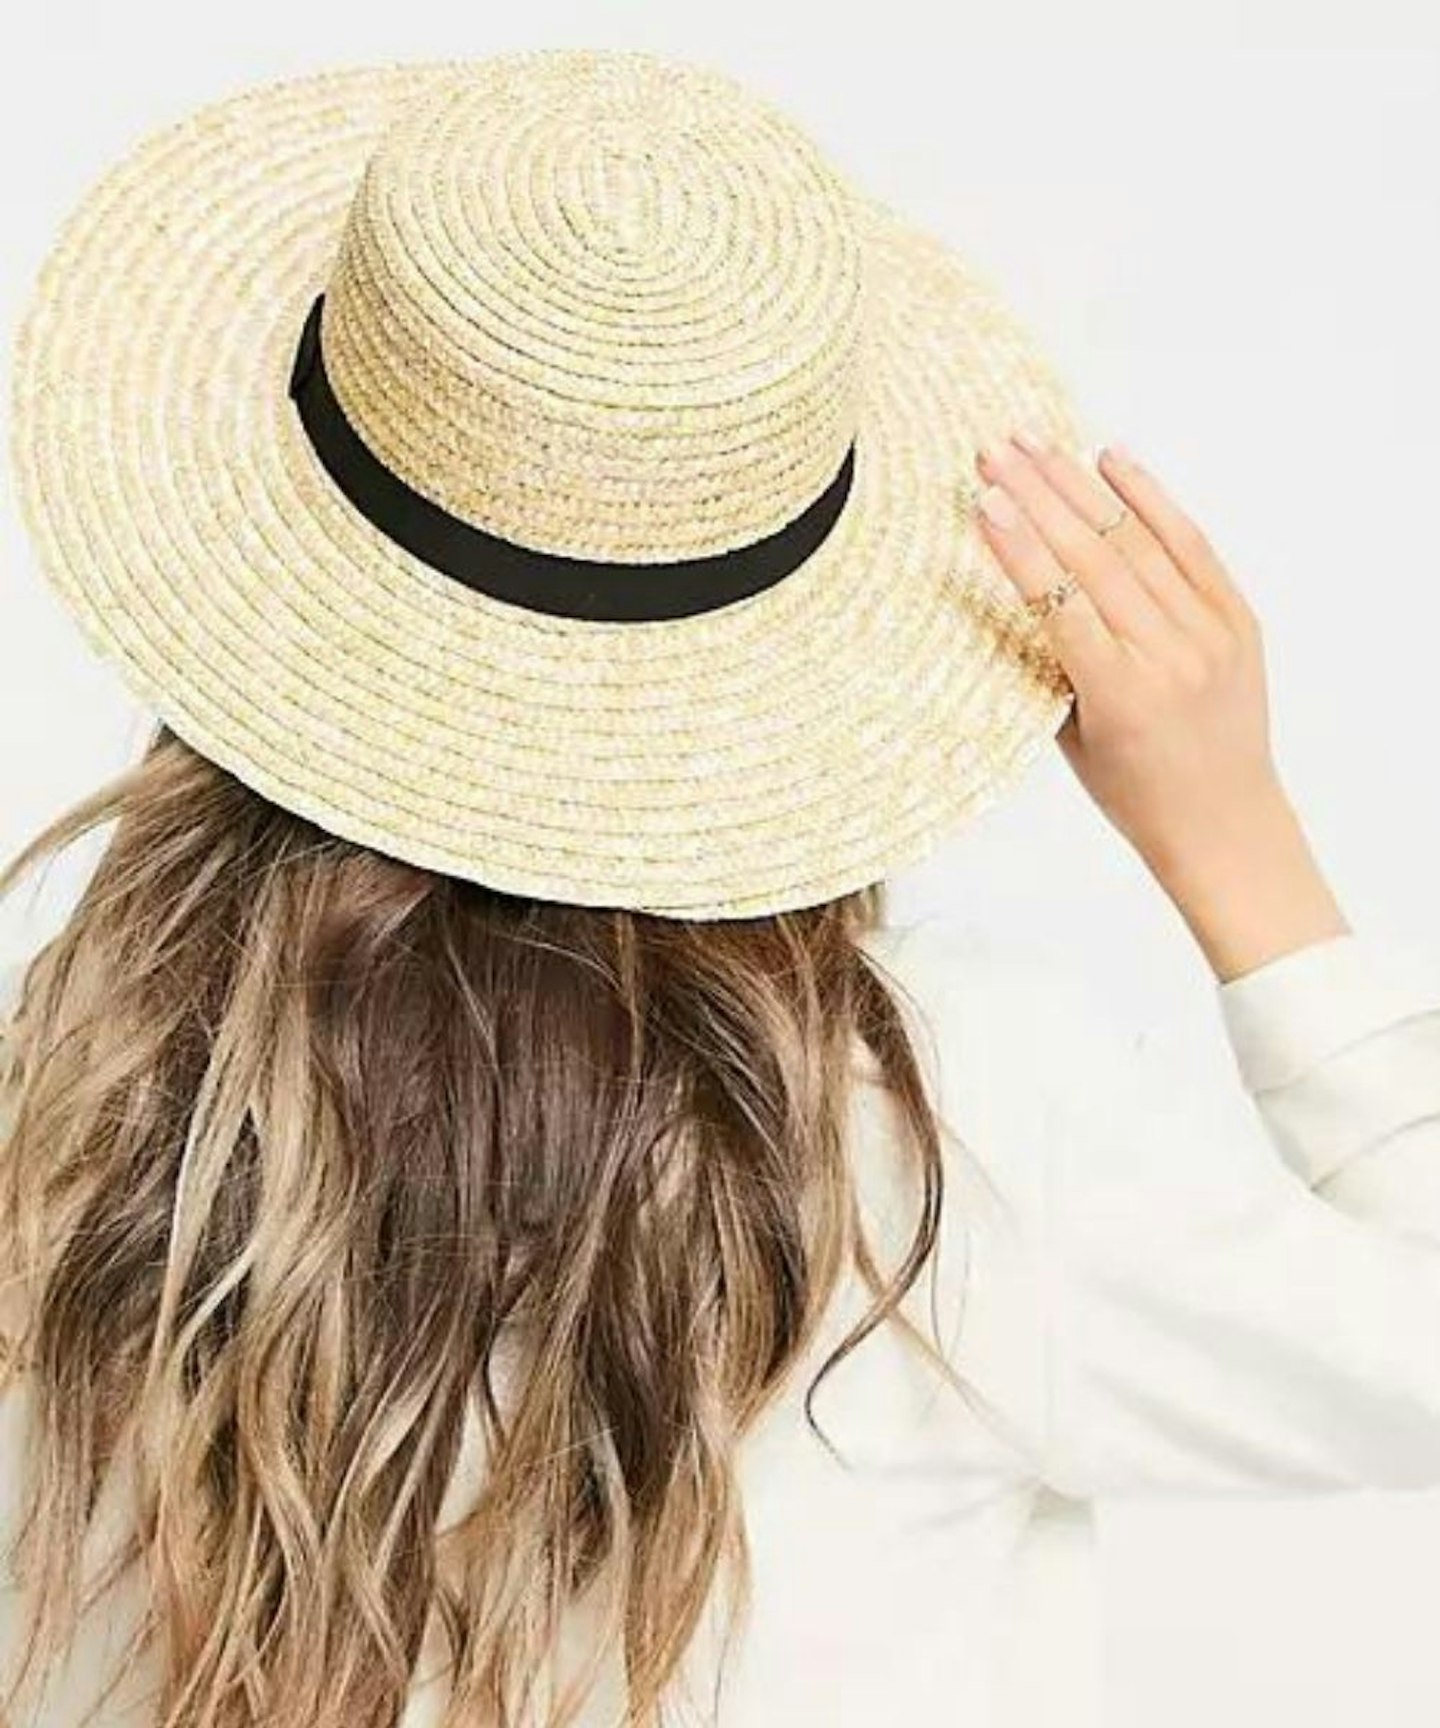 South Beach Exclusive Straw Boater Hat